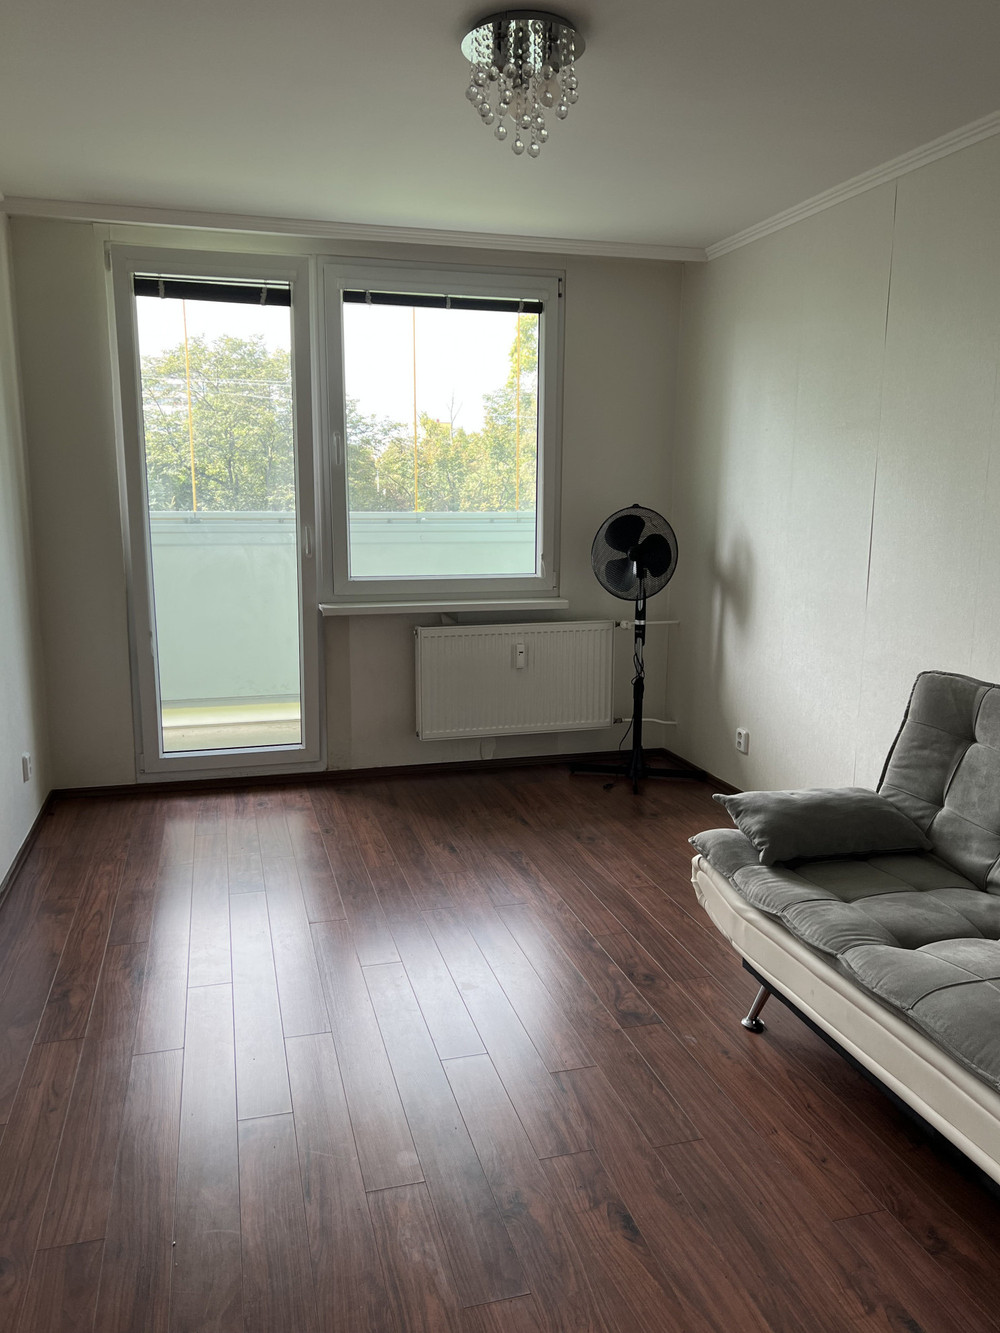 Fully equipped cozy flat near a beautiful park